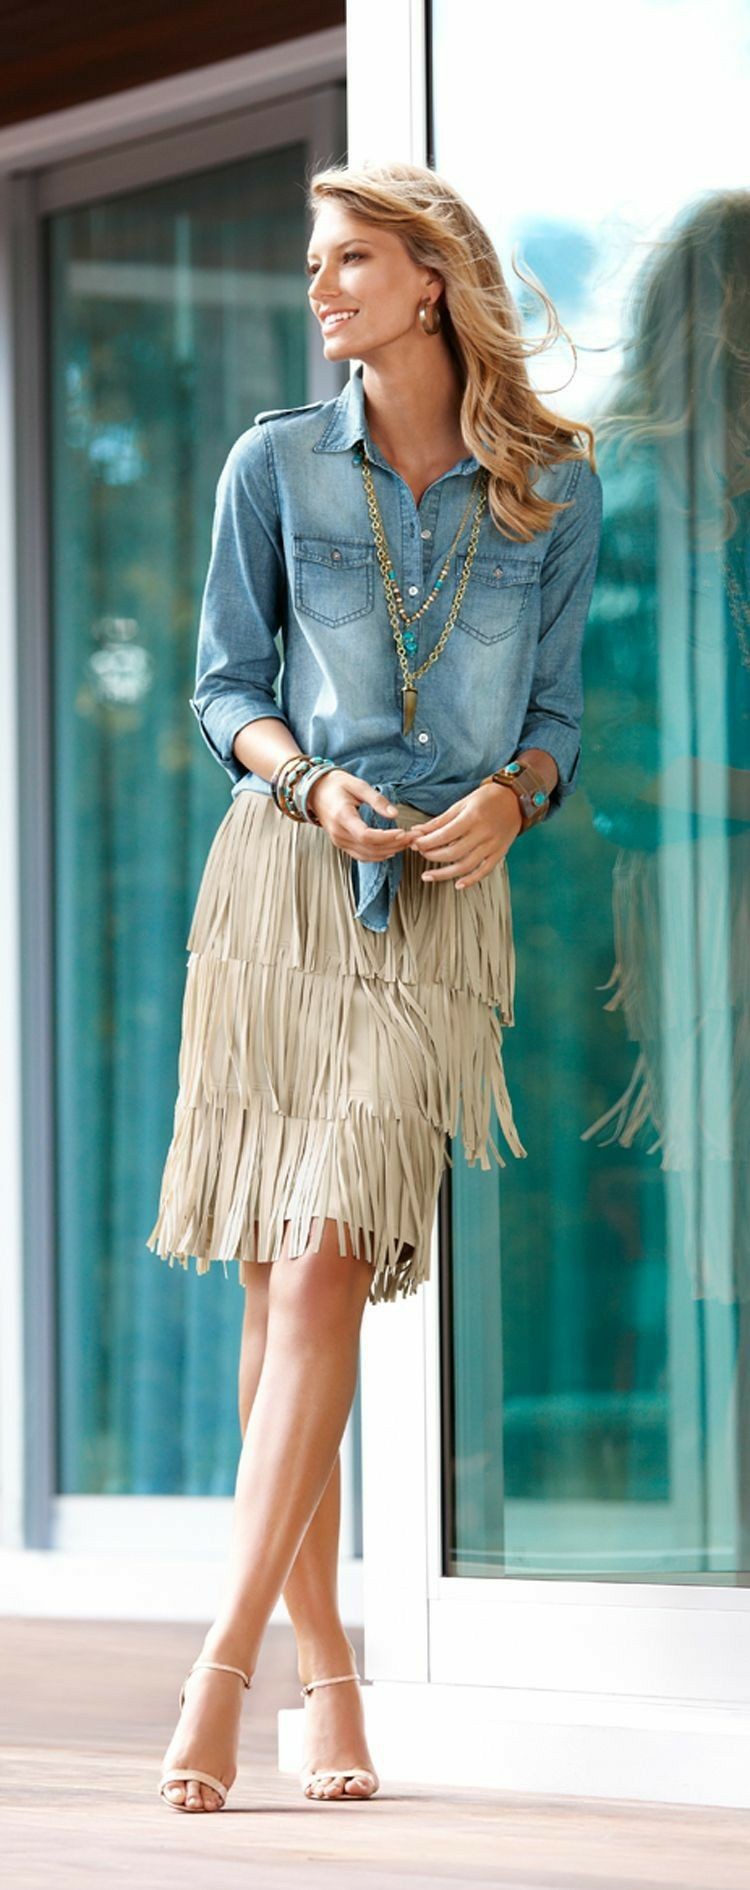 Combinar falda flecos beige twinset fringed skirt, street fashion: shirts,  Pencil skirt,  fashion model,  Street Style,  Turquoise And Beige Outfit,  Fringe Skirts,  Twinset Fringed Skirt  